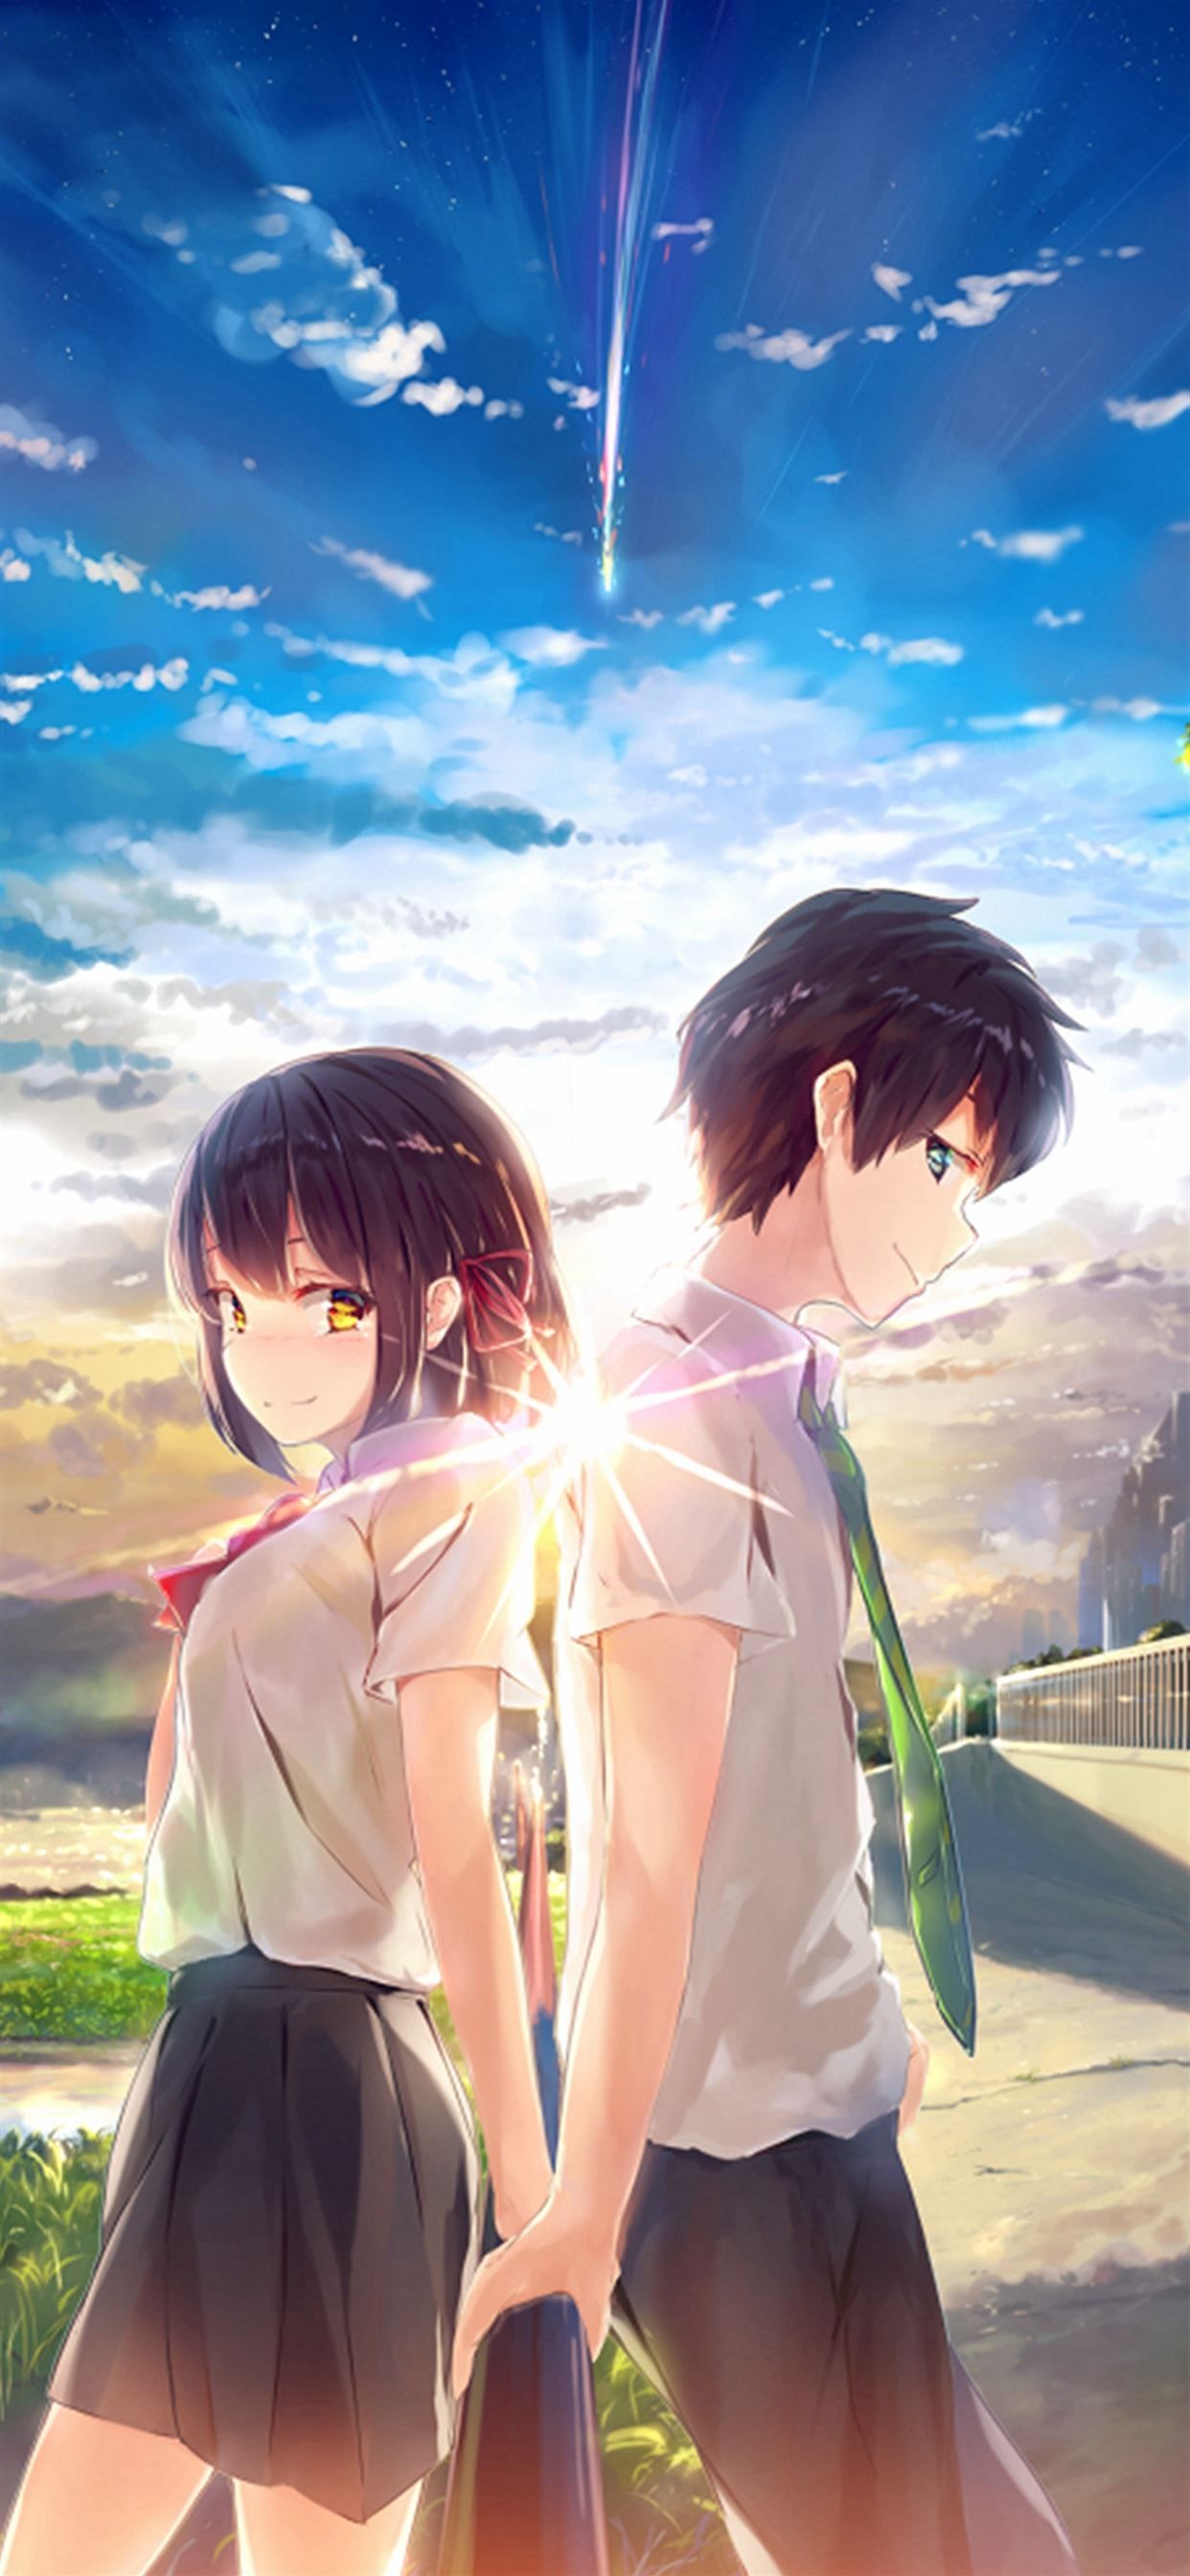 Anime Yourname Sky Illustration Art iPhone 11 Wallpaper Free Download